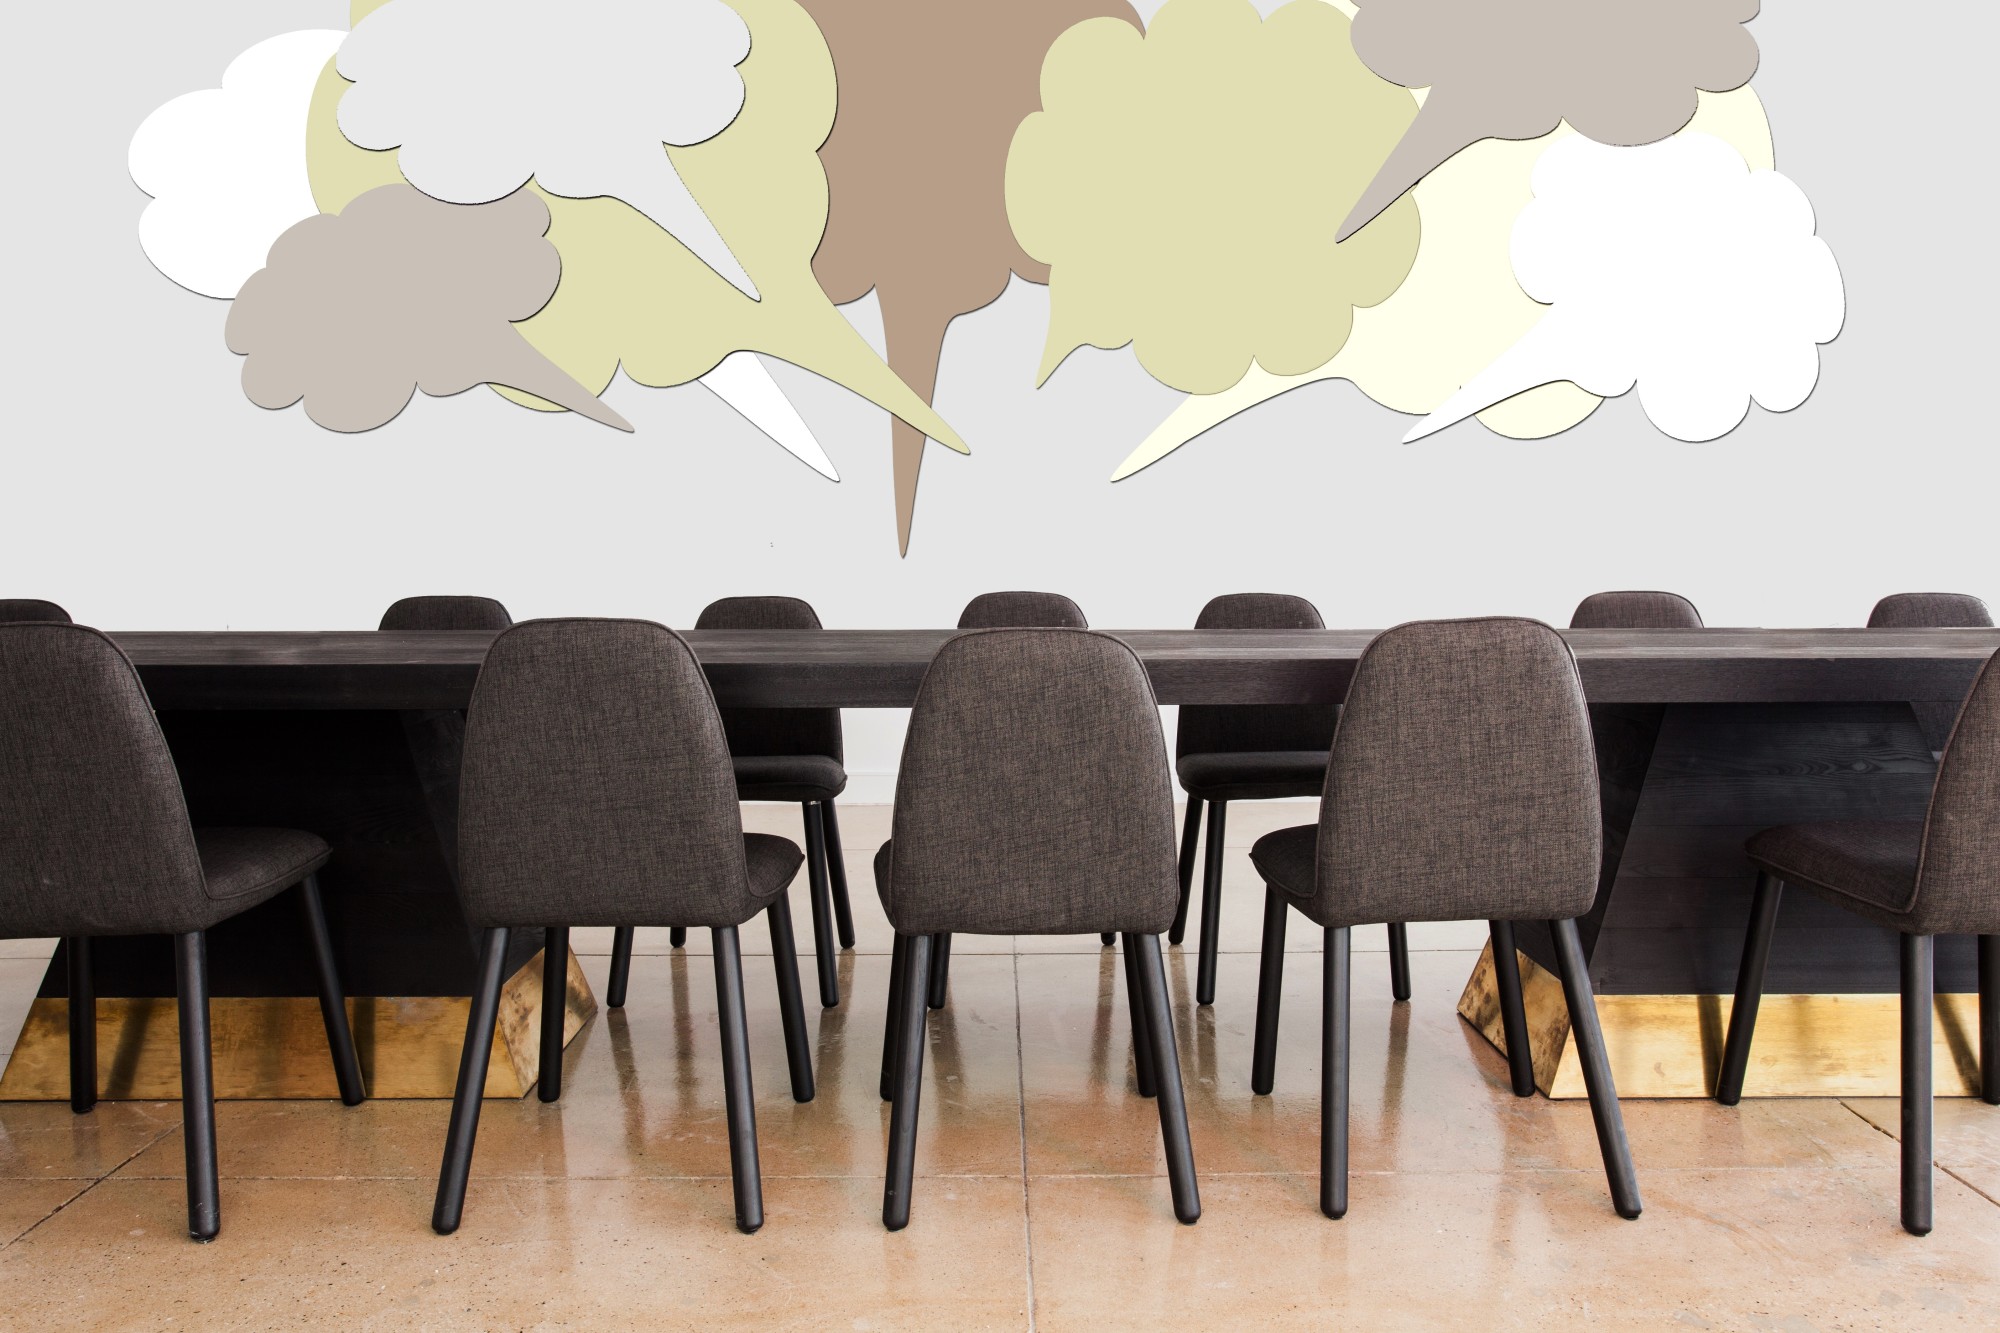 4 Ways to Increase Attendance at HOA Meetings